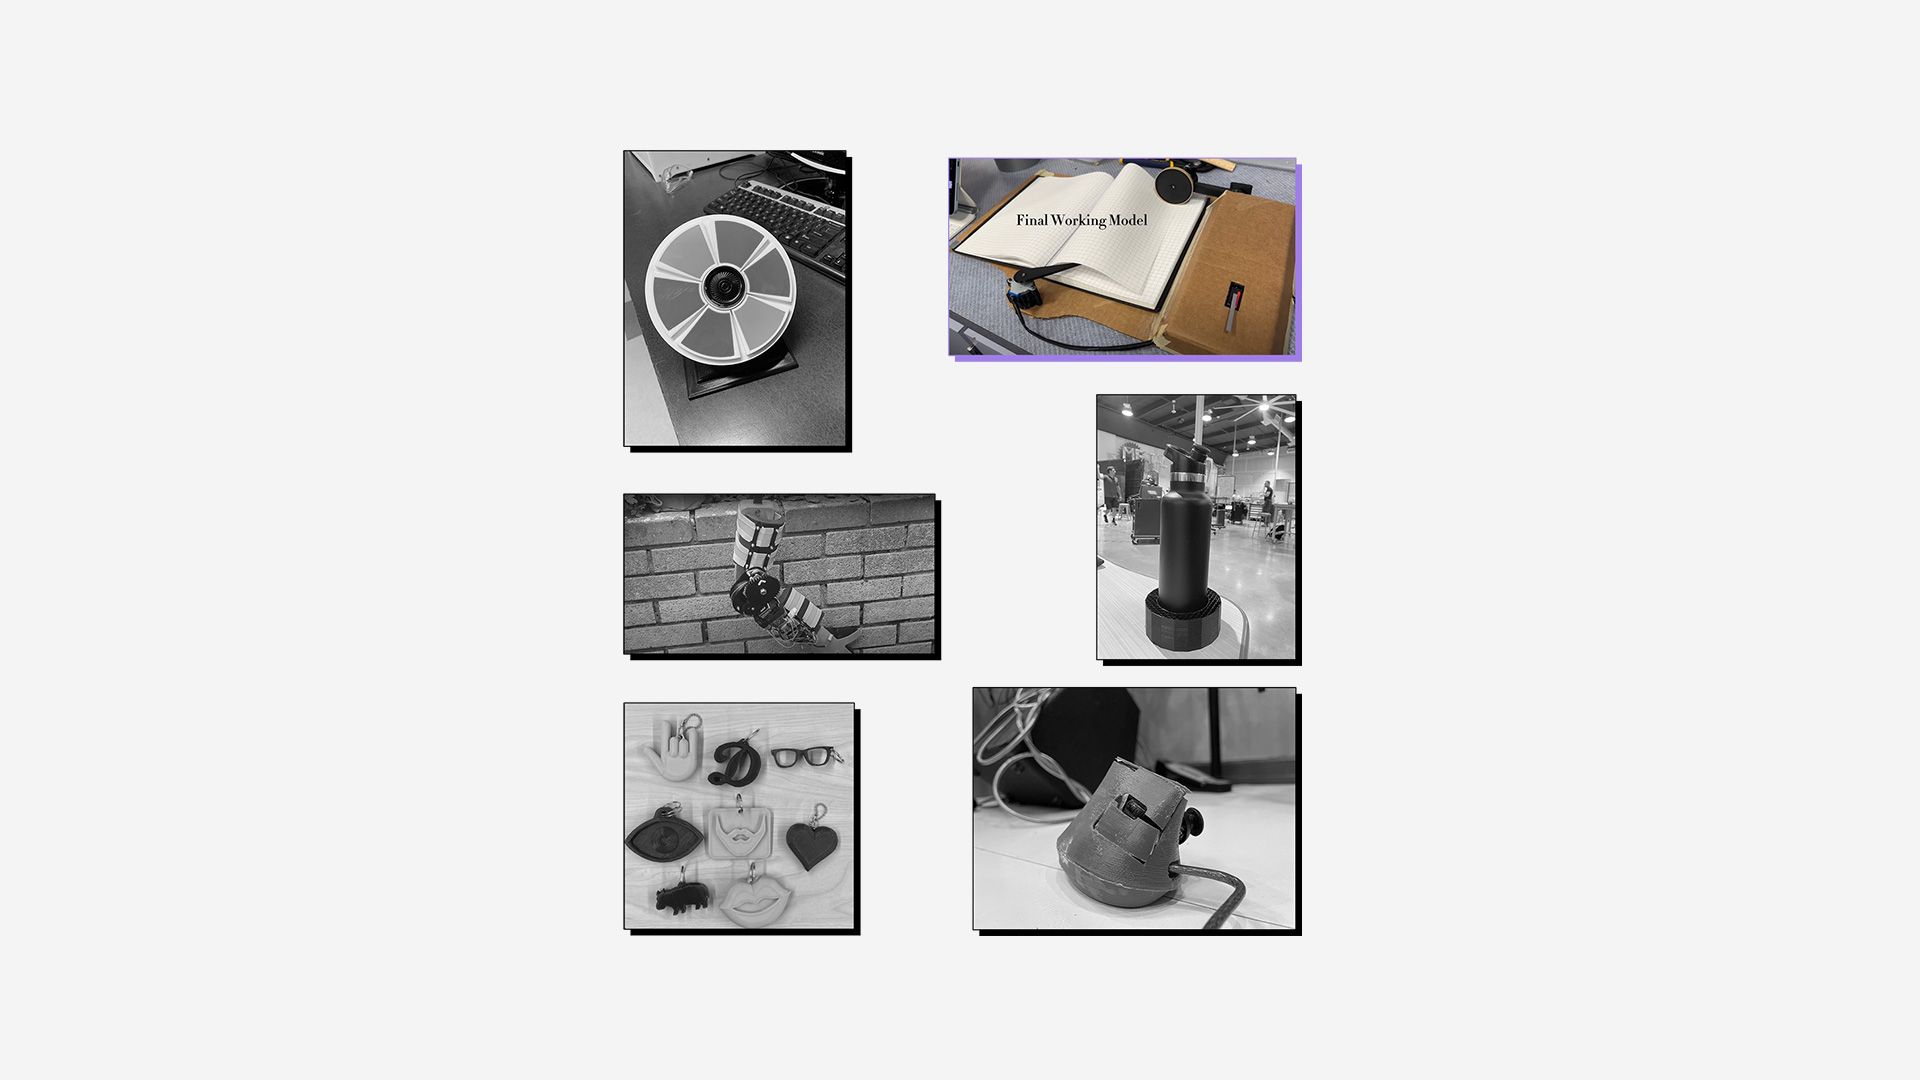 Collage of 3D printed assistive devices with winning entry (automatic page turner) highlighted.